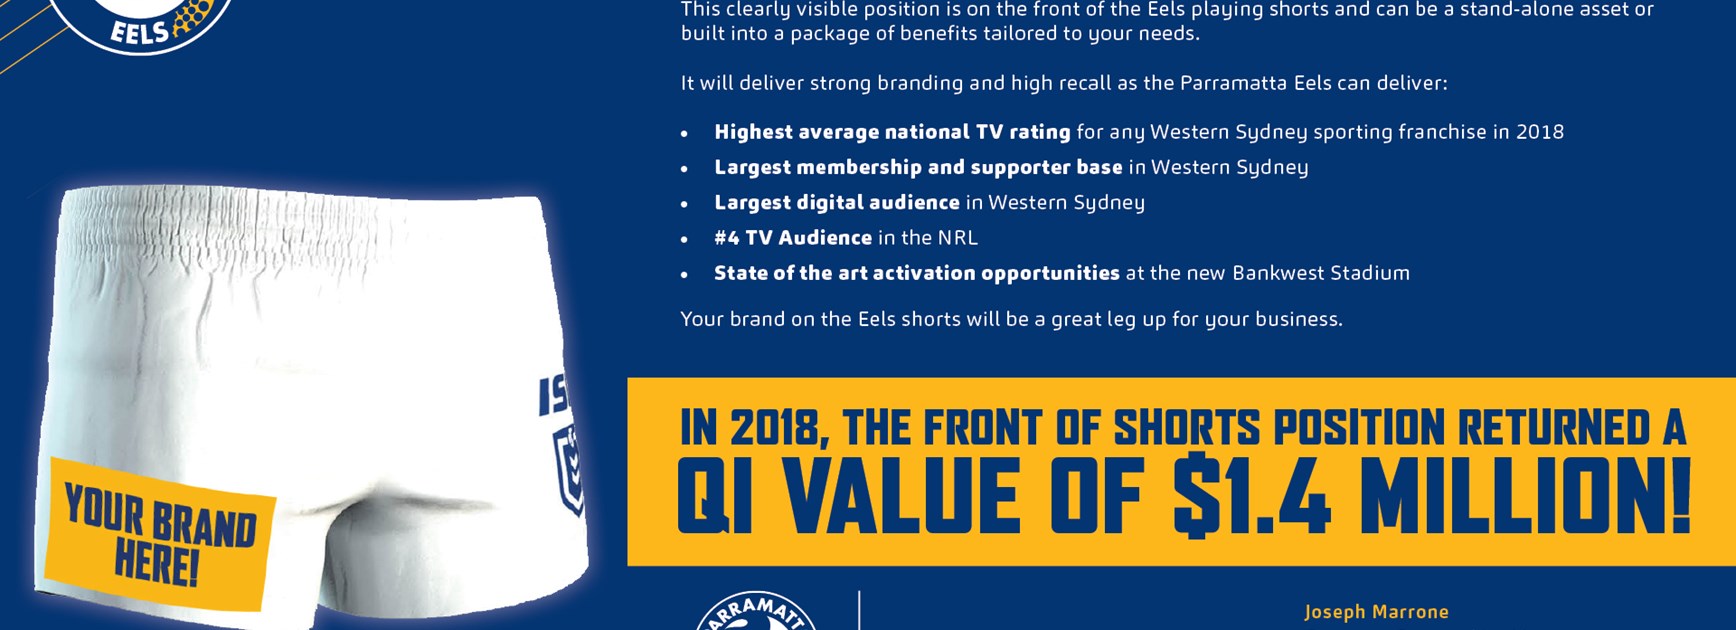 Unique branding opportunity available - Front of shorts